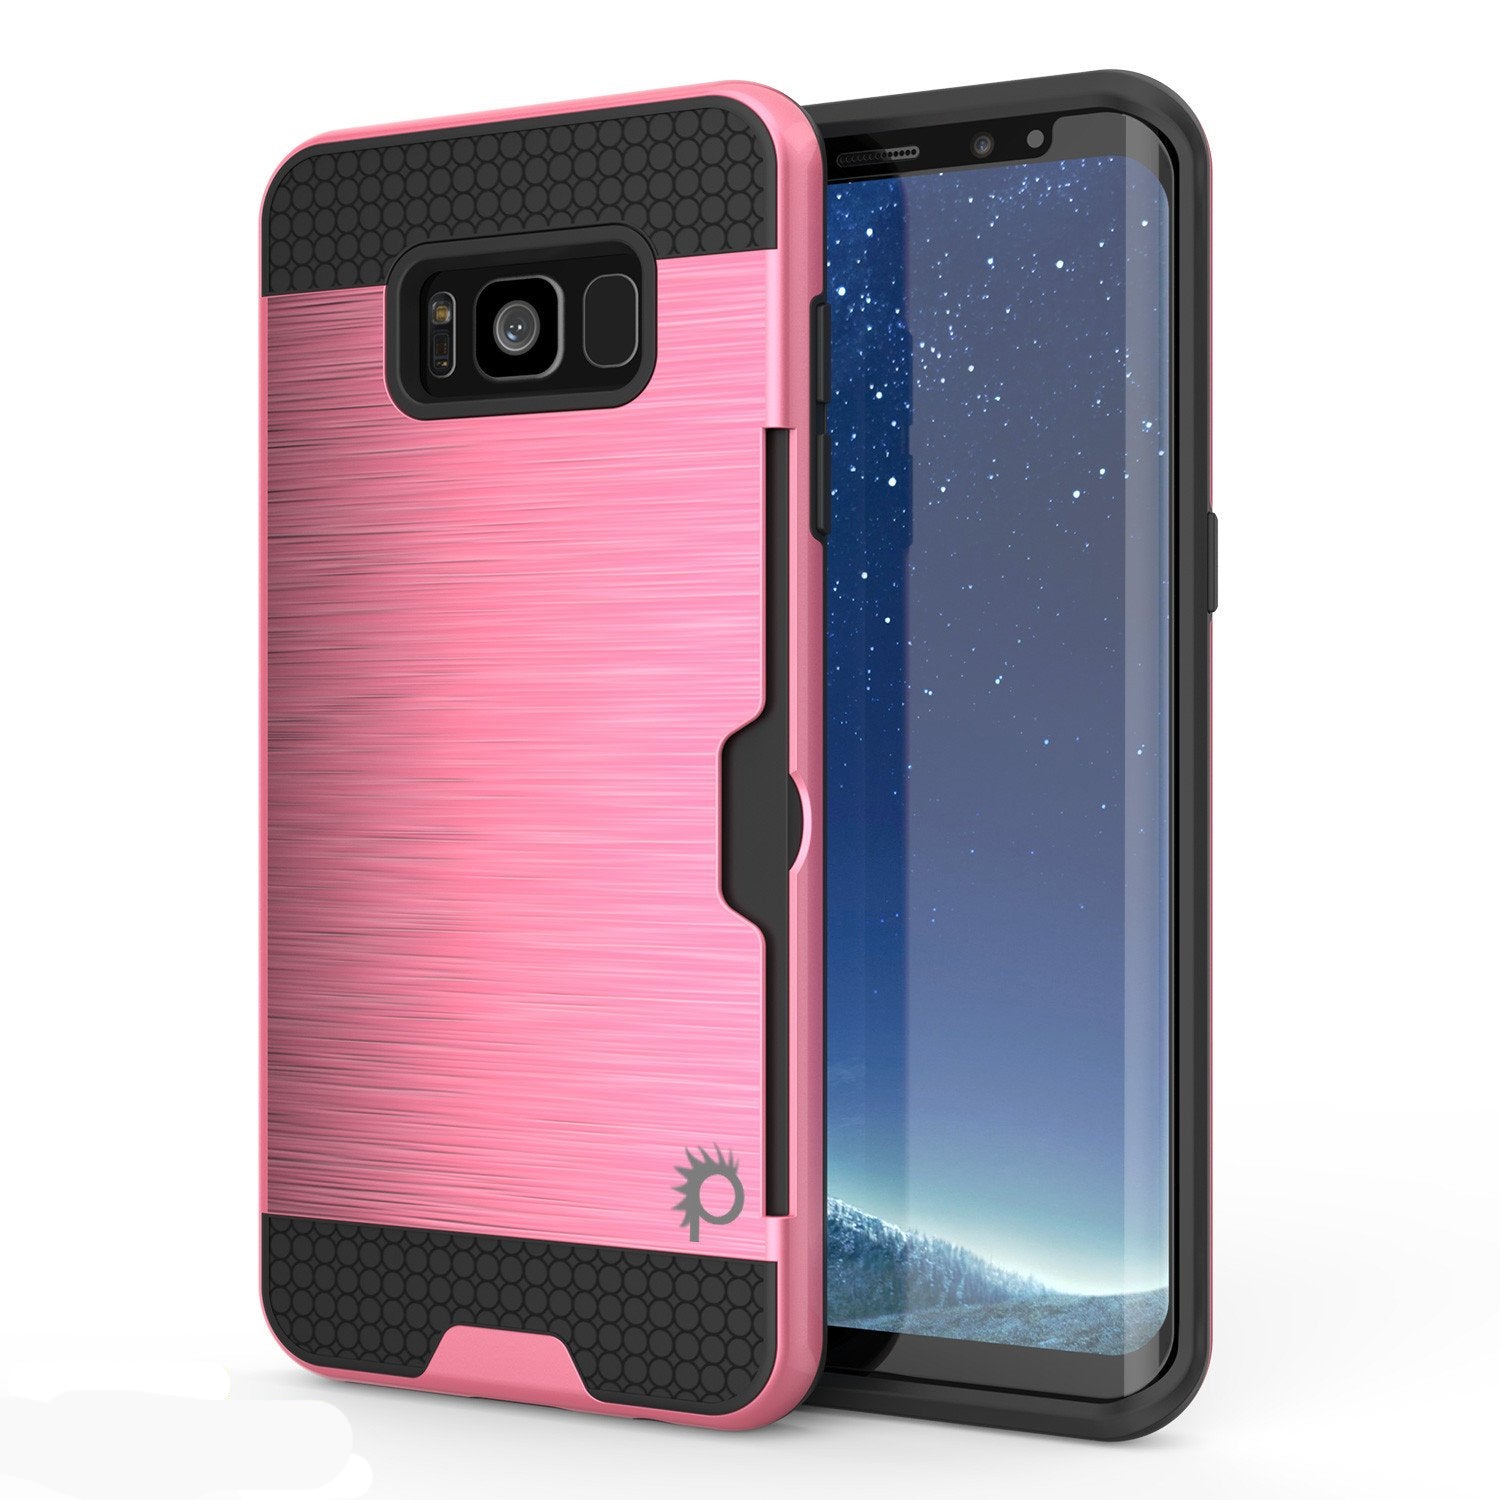 Galaxy S8 Plus Case, PUNKcase [SLOT Series] [Slim Fit] Dual-Layer Armor Cover w/Integrated Anti-Shock System, Credit Card Slot [Pink] (Color in image: Pink)